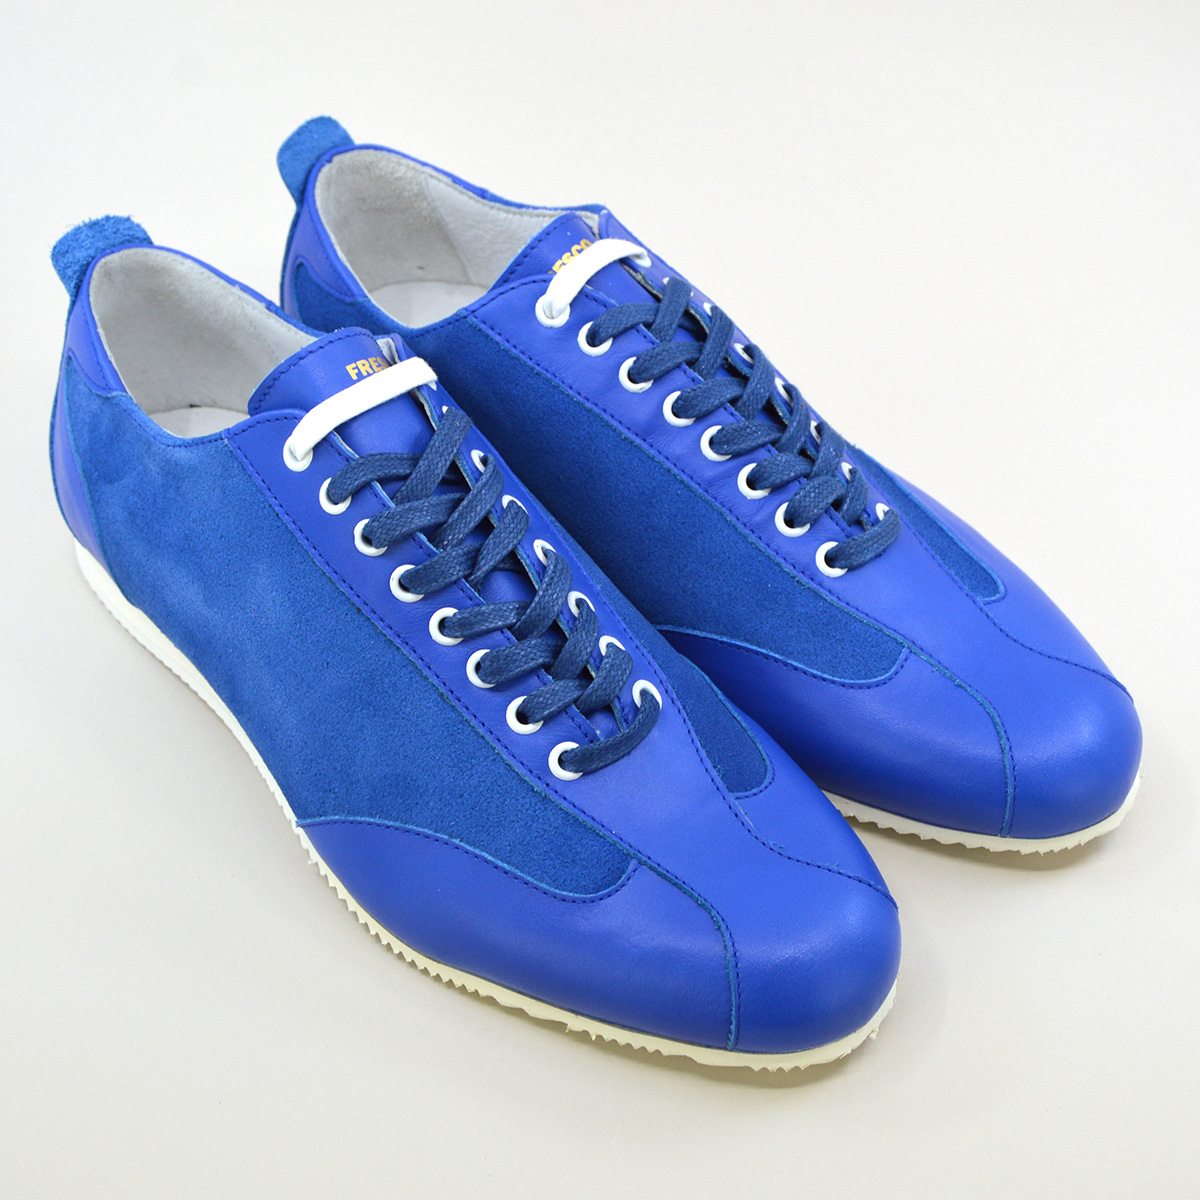 The Fresco In Blue Leather & Suede – Old School Trainers – Mod Shoes